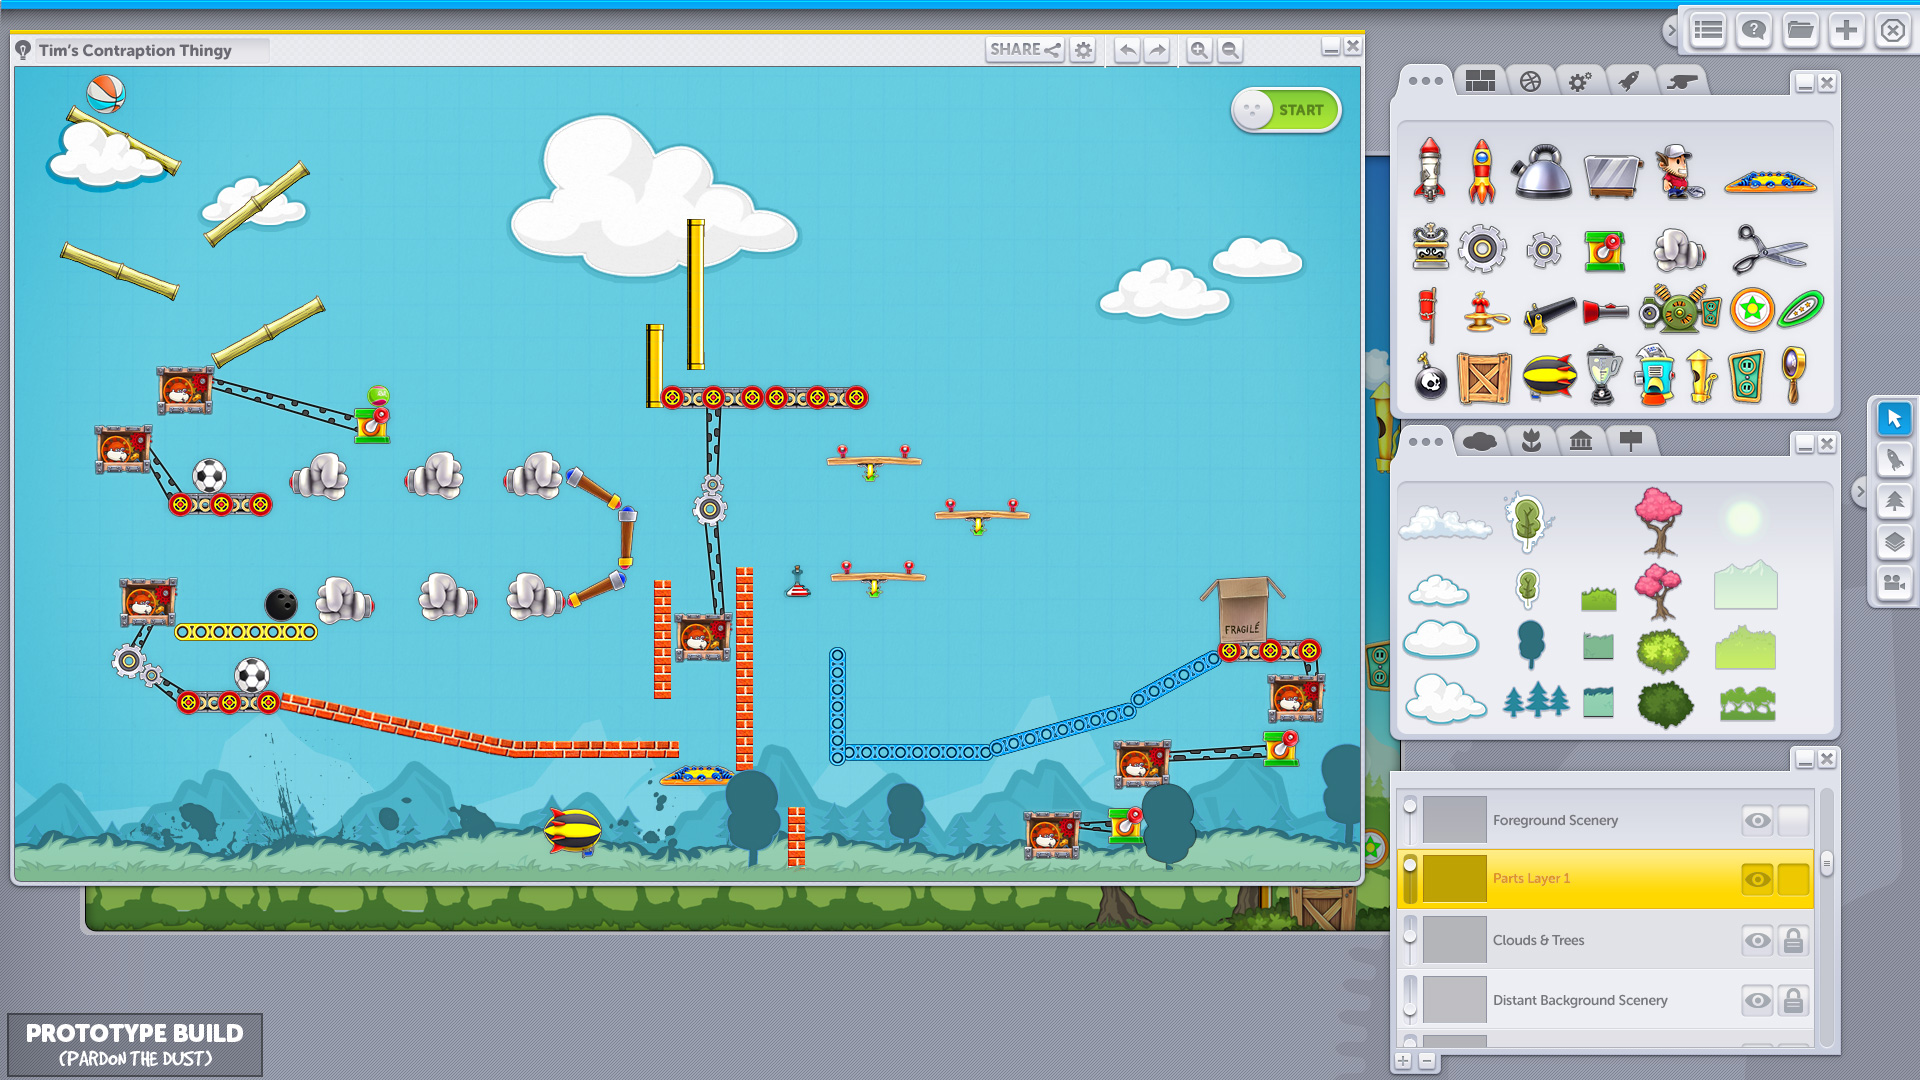 install contraption maker for all users